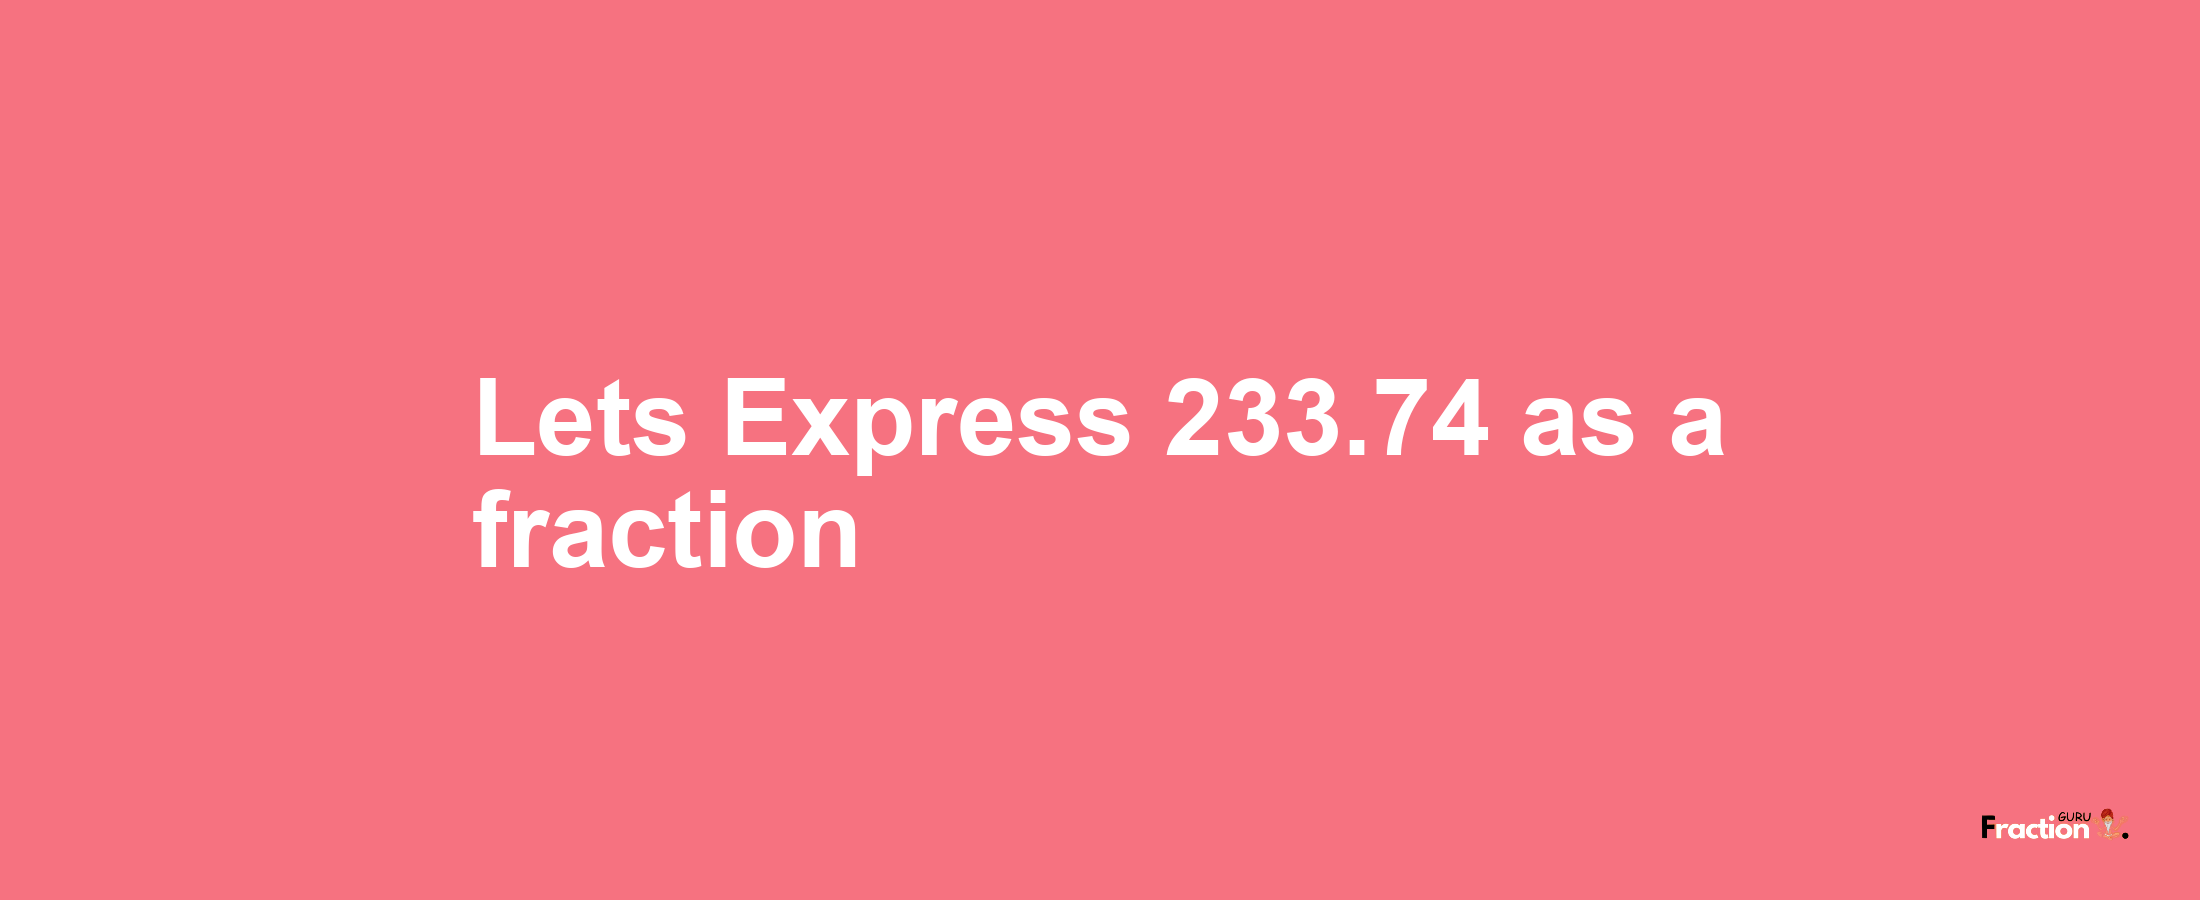 Lets Express 233.74 as afraction